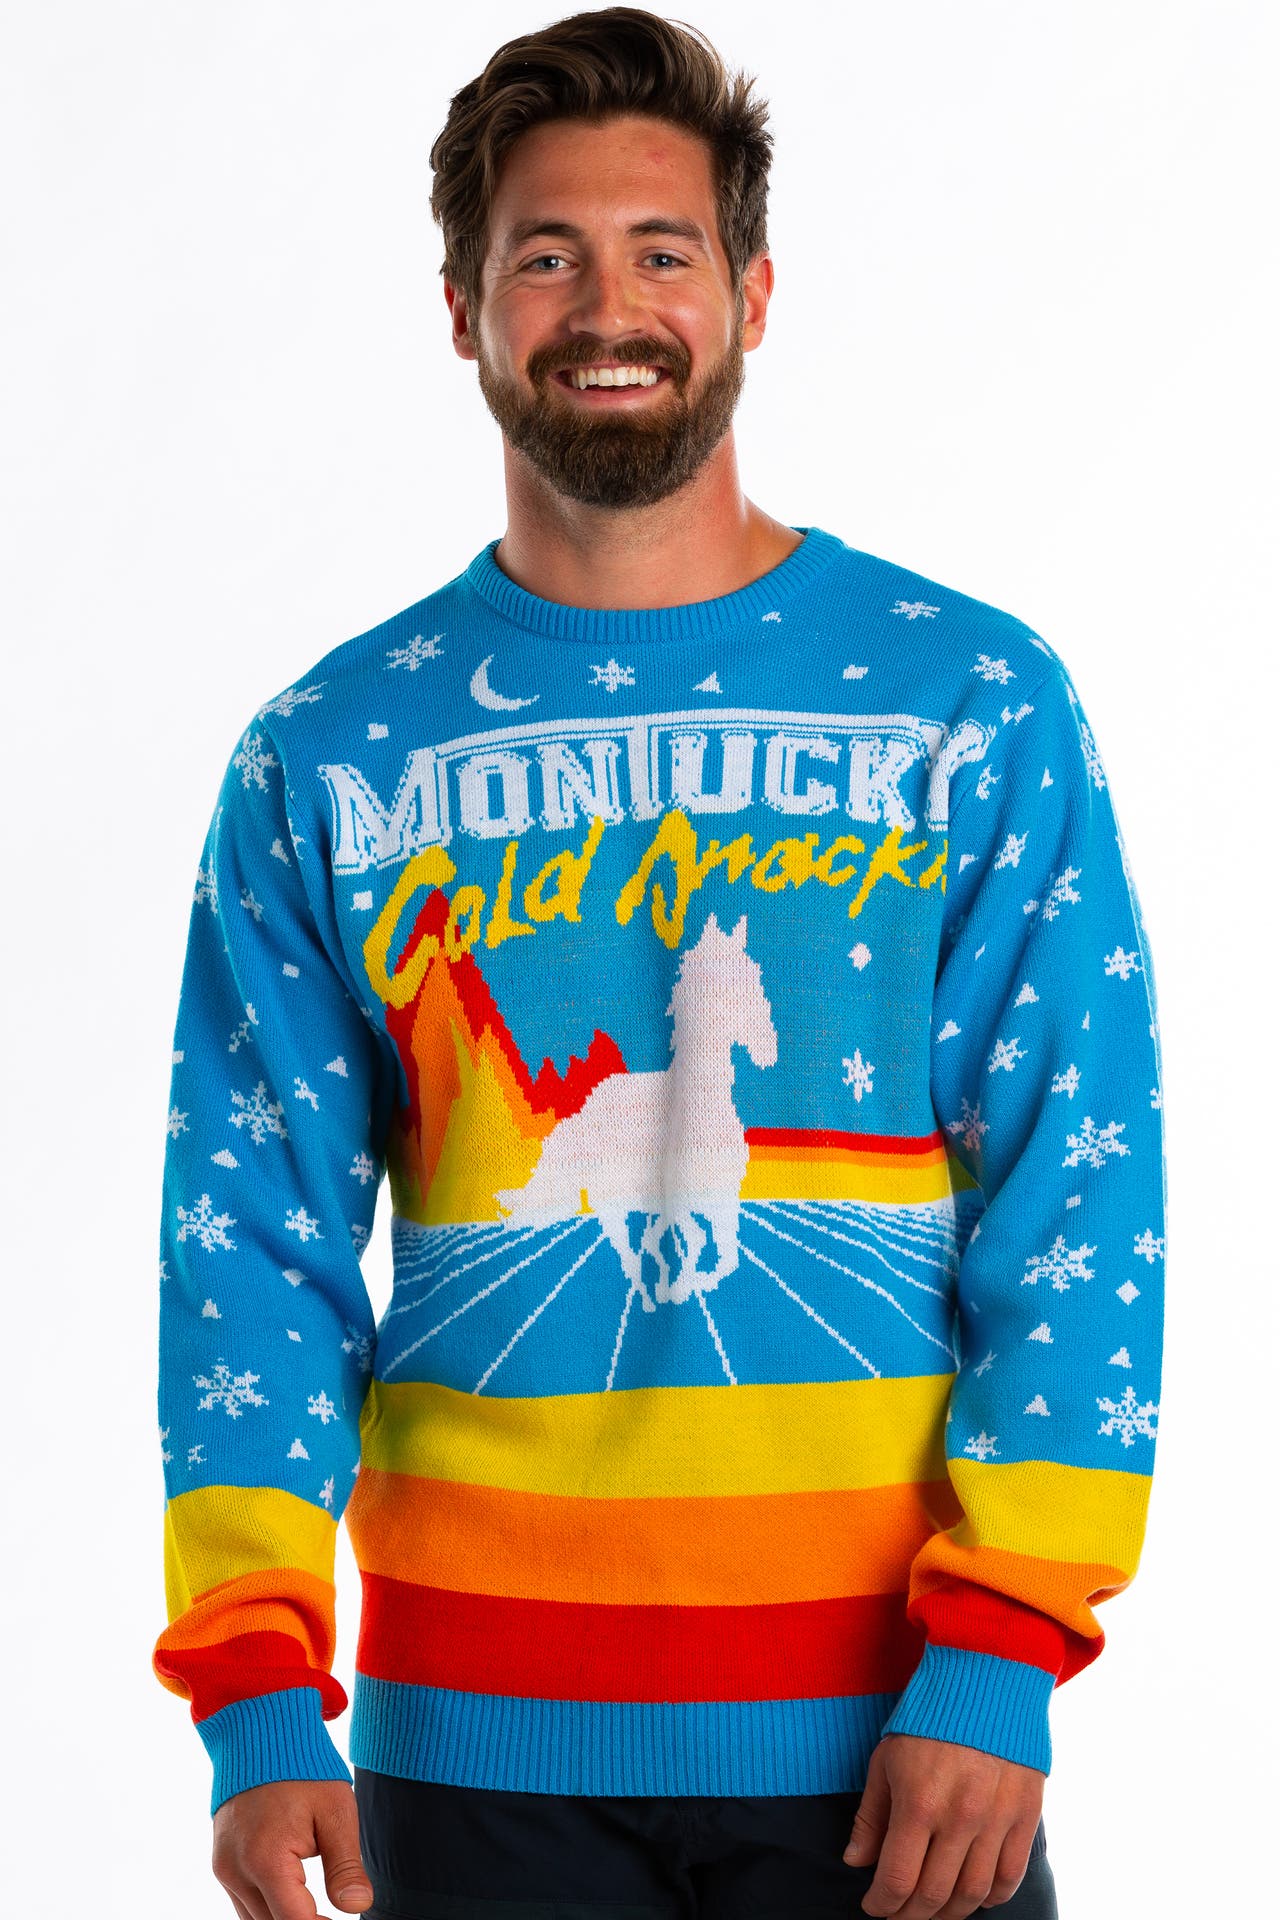 image of The Swig Sky Country Montucky Holiday Sweater courtesy of Shinesty